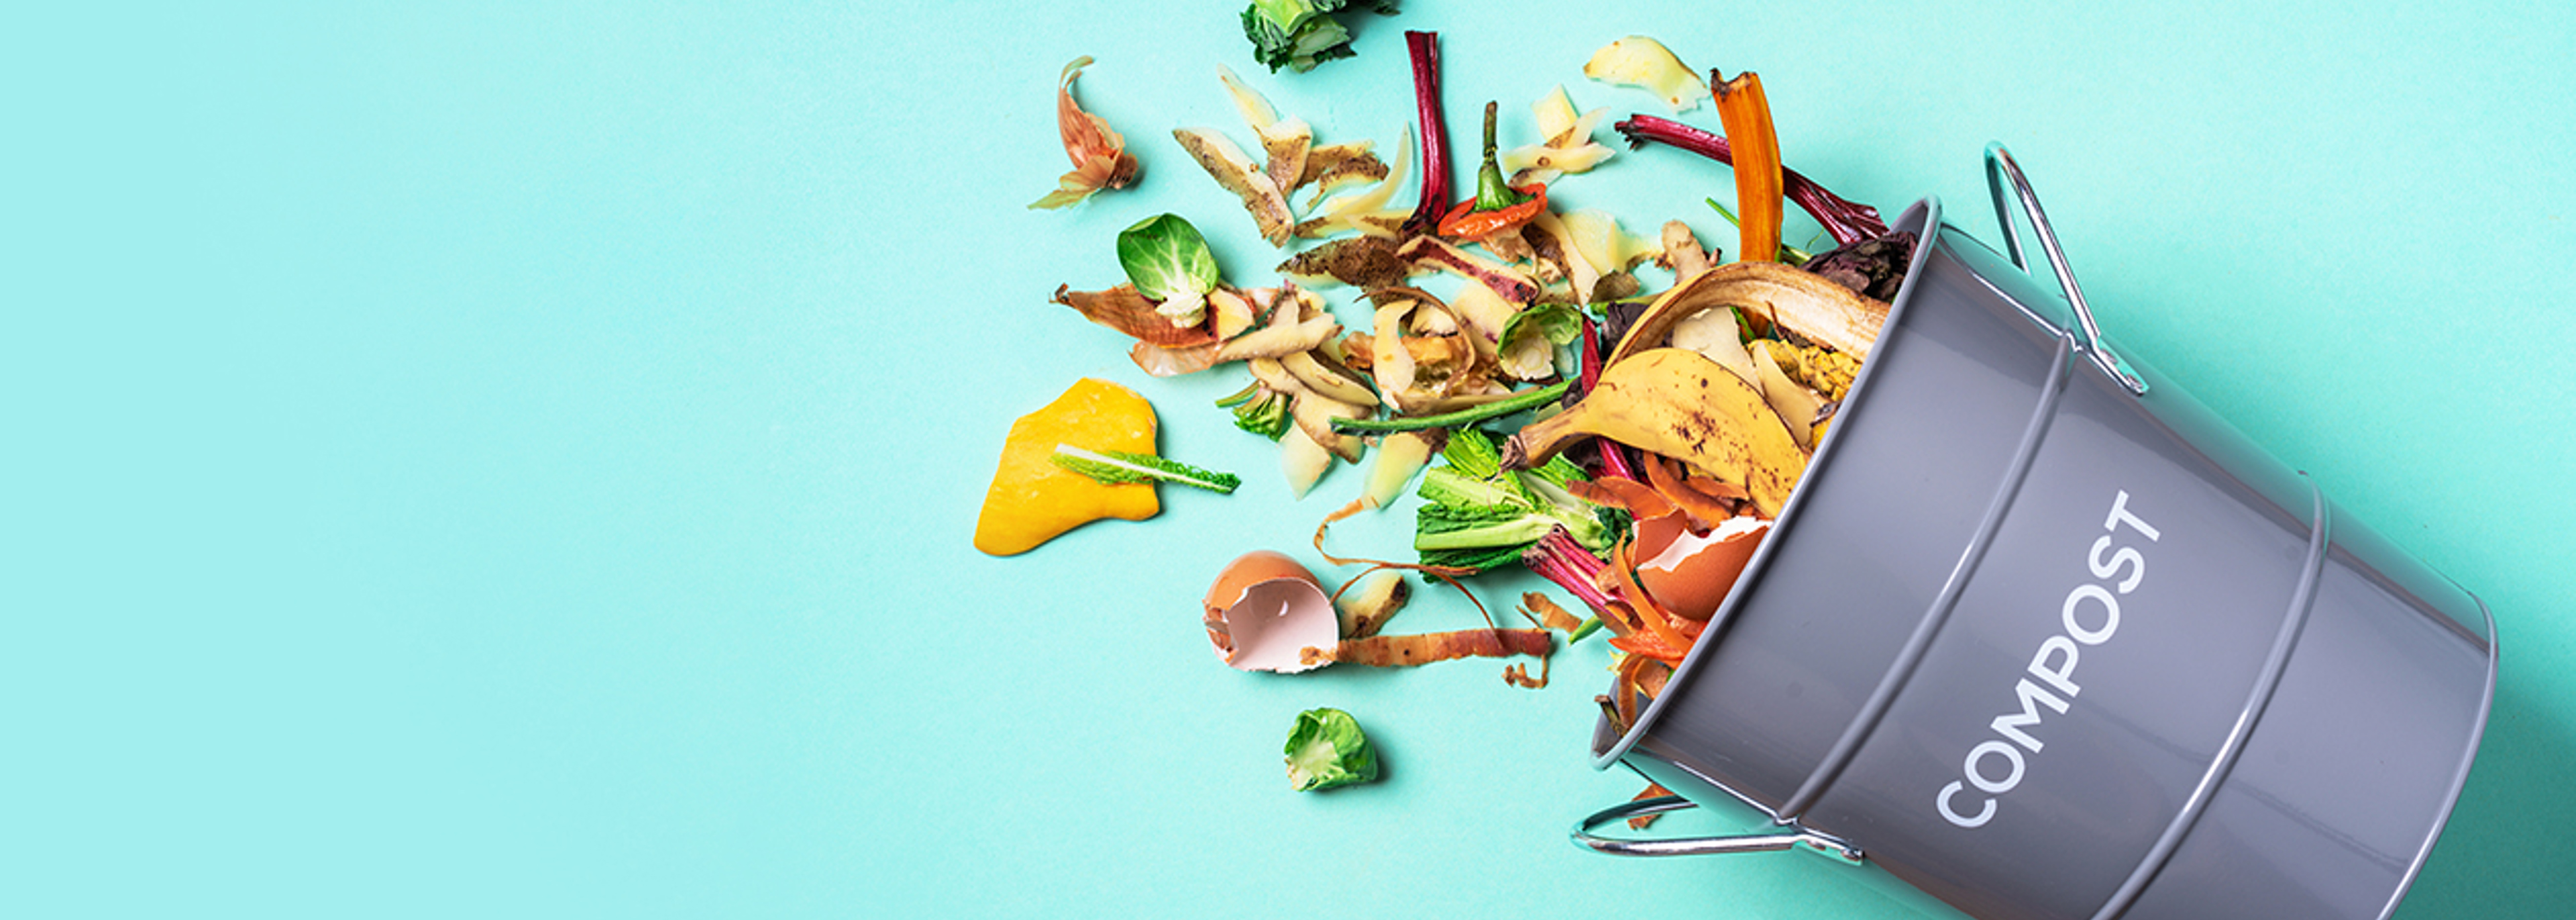 UK household food waste has fallen but it continues to feed climate change